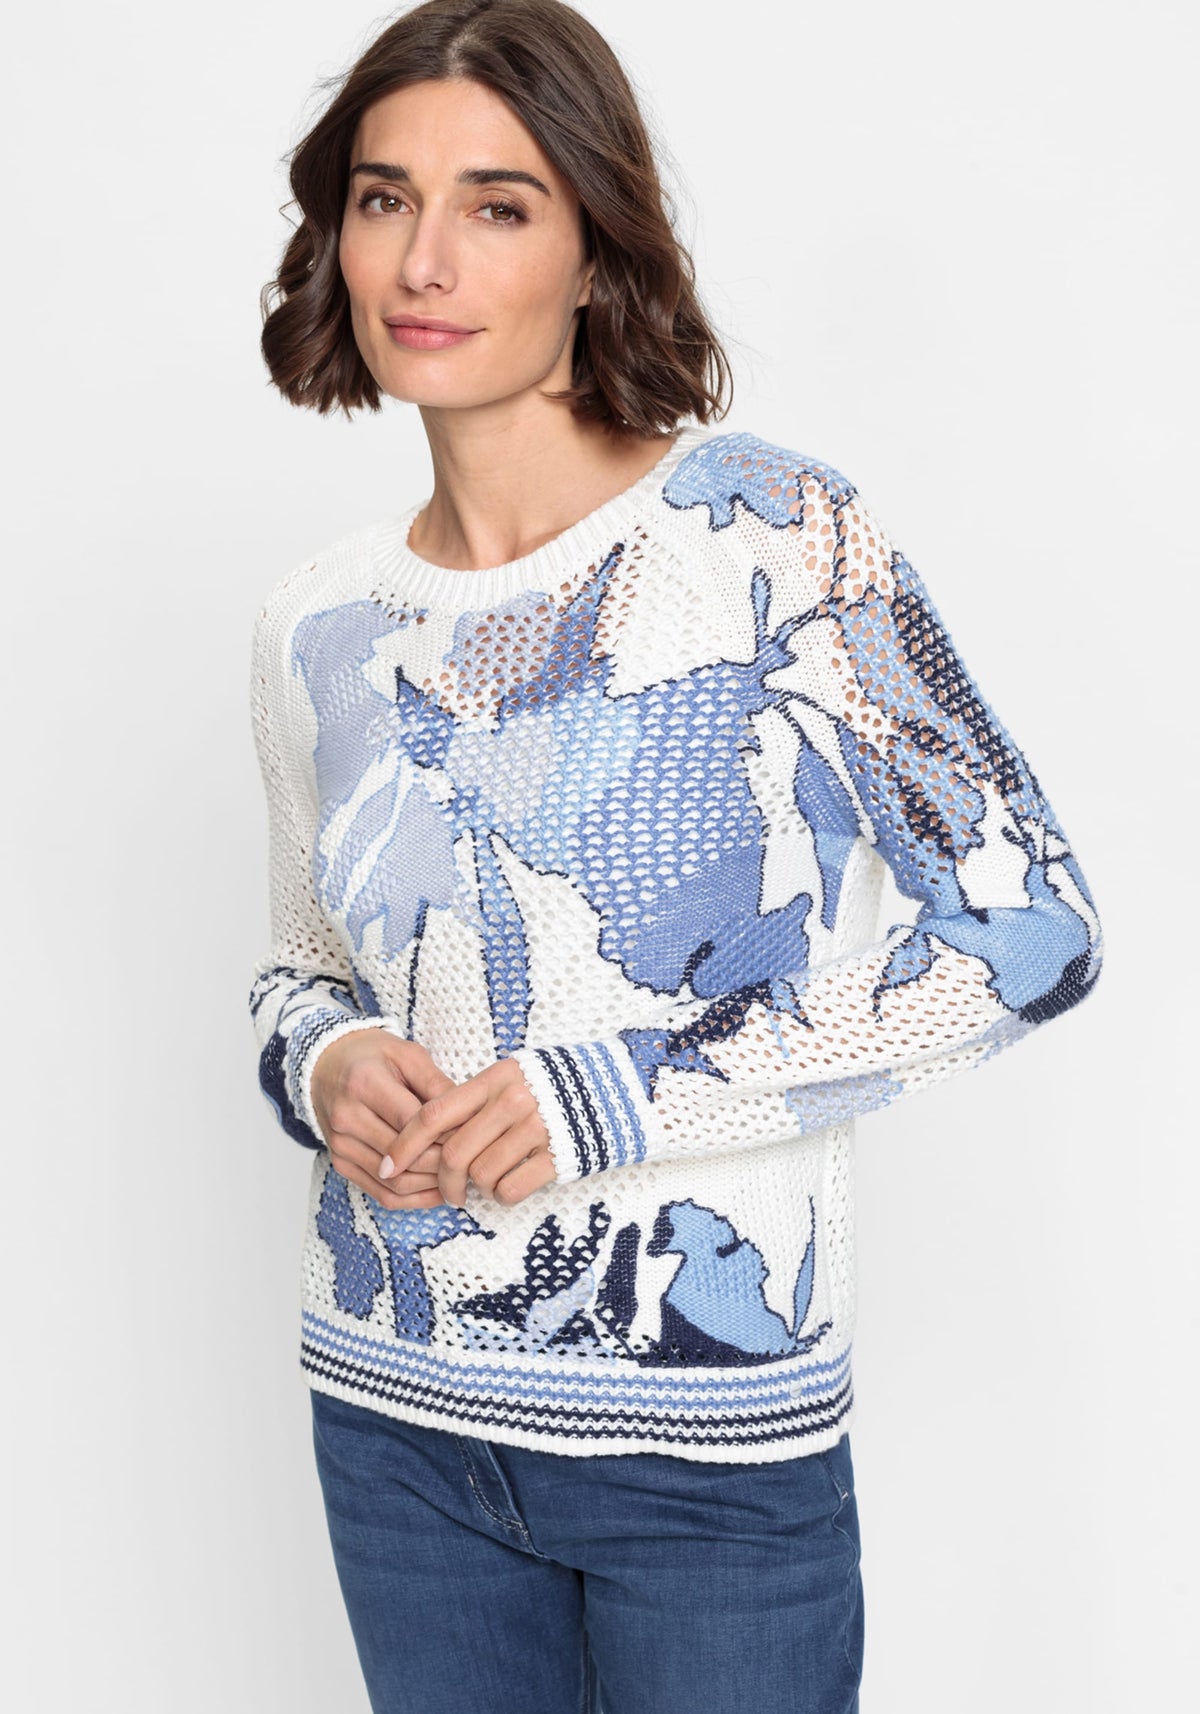 100% Cotton Long Sleeve Open Knit Abstract Print Sweater